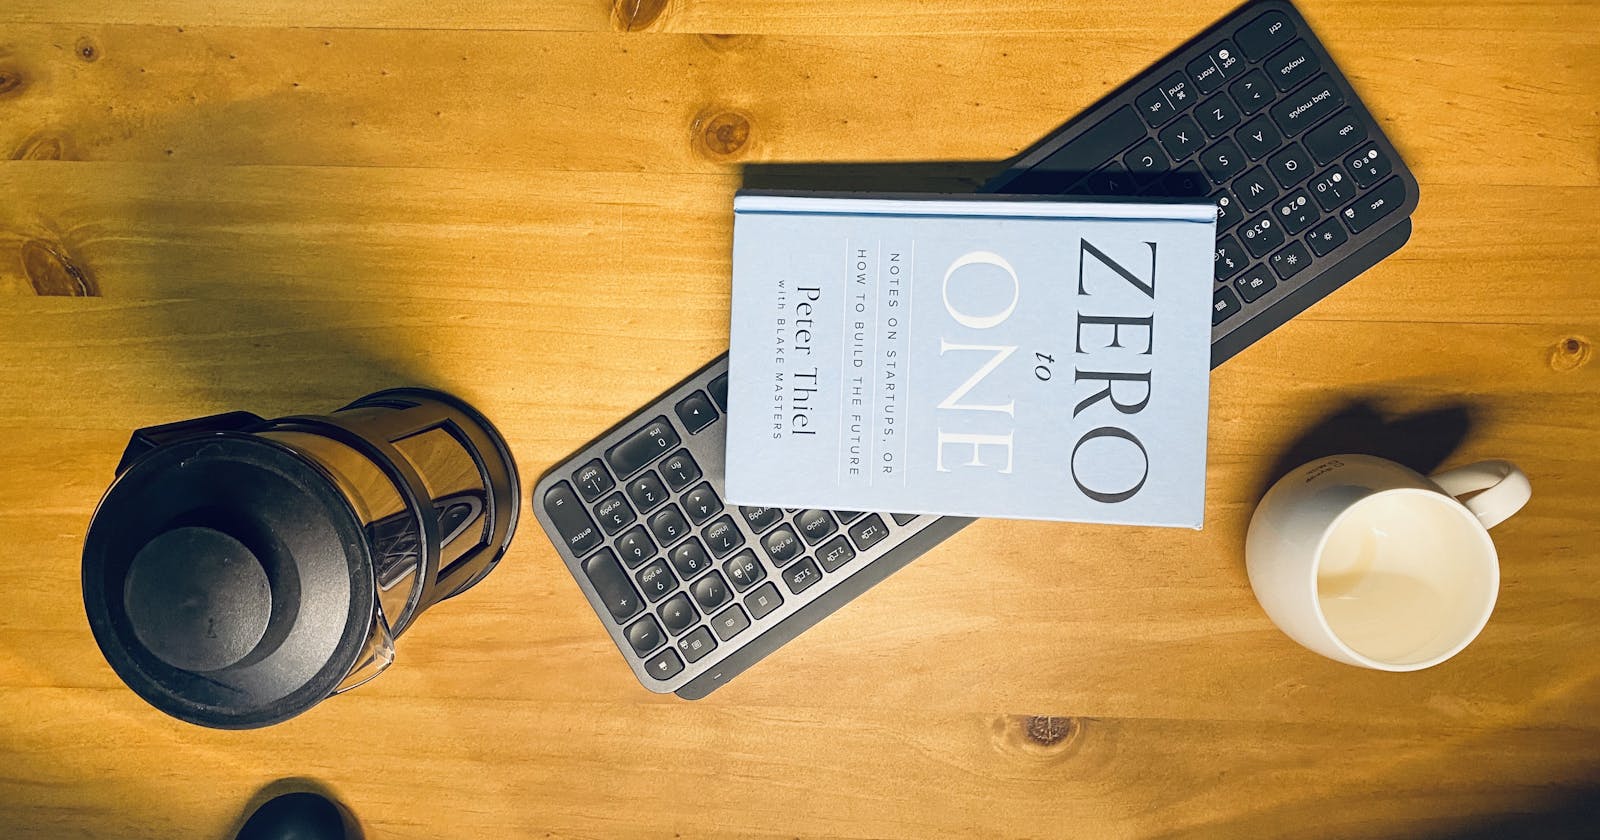 Notes on: "Zero to one: Notes on Startups, or how to build the future" Part 1